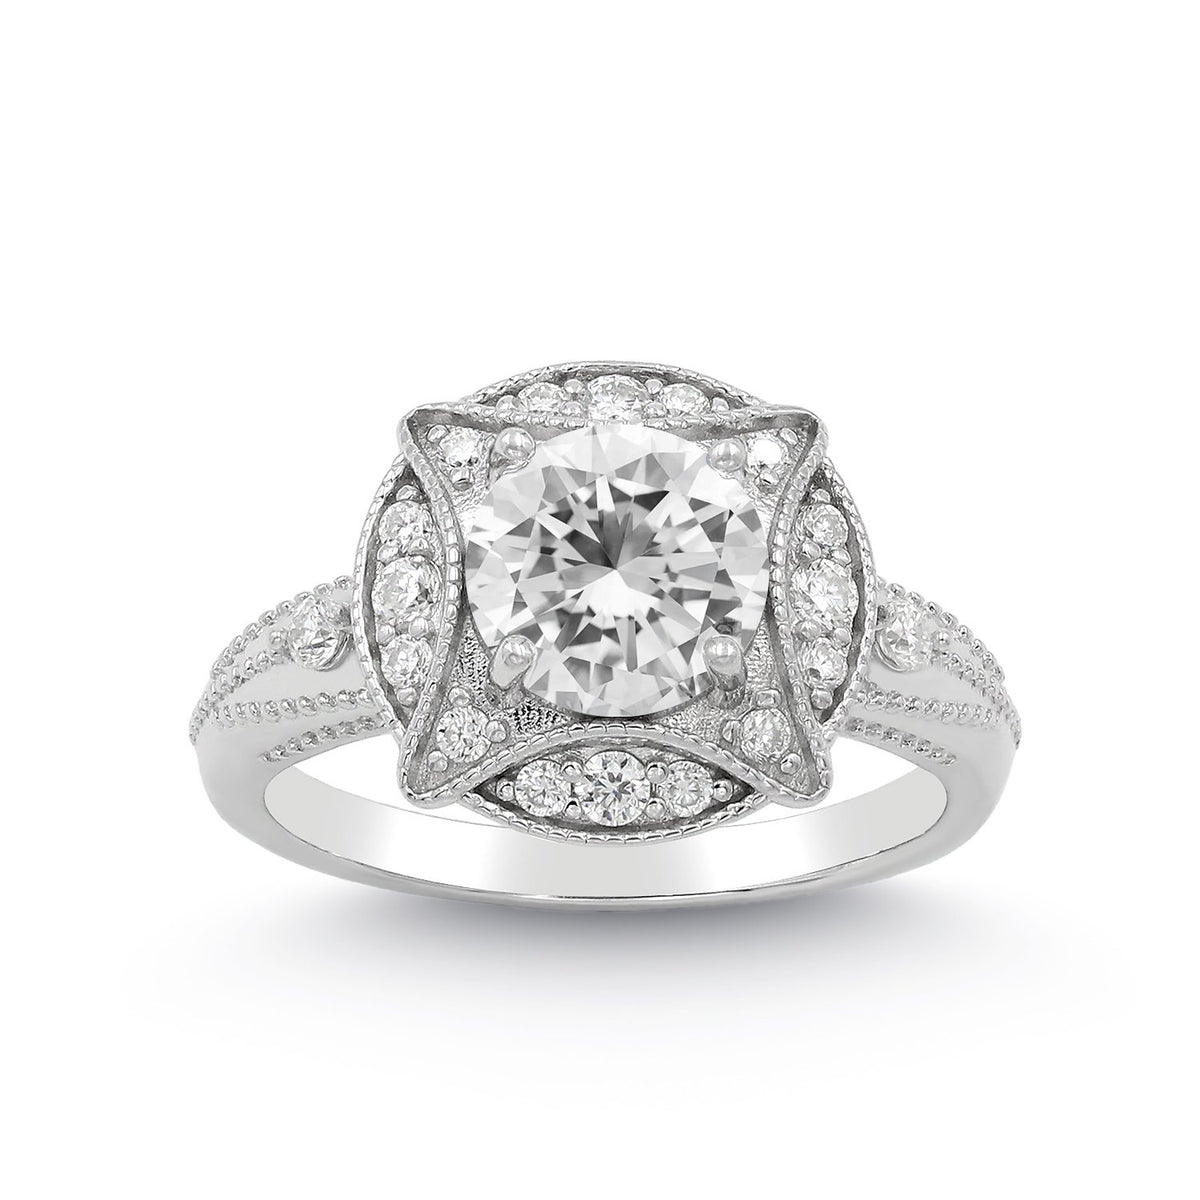 2.20 CTTW Moissanite Halo Engagement Ring in 925 Sterling Silver